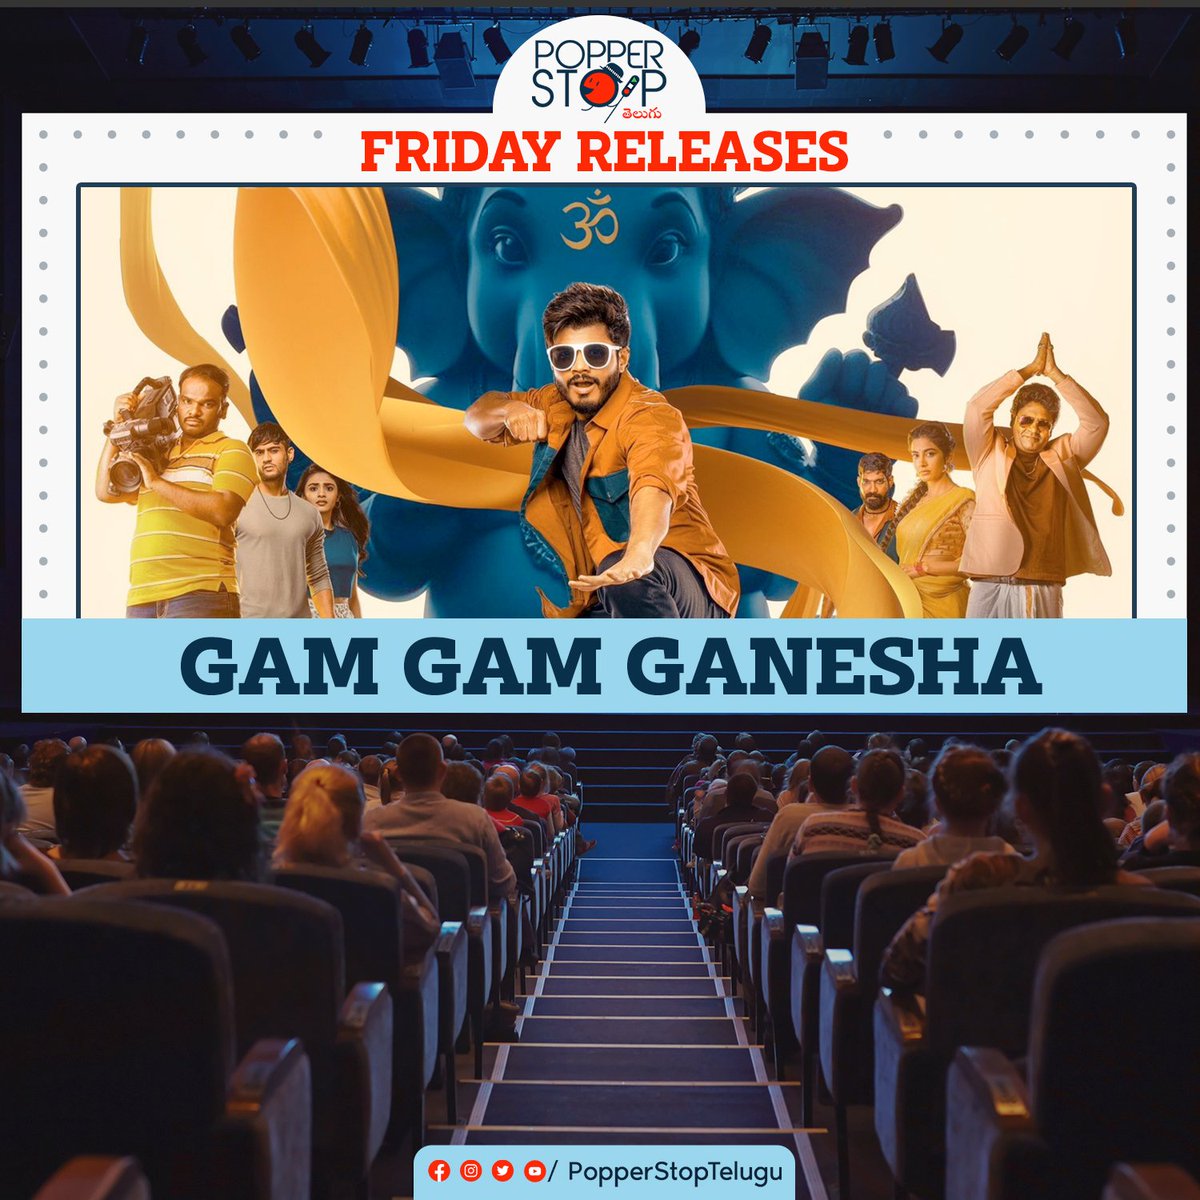 The ultimate theatre experience awaits with ultimate movies! 🤩🍿

Which would you go for ?
#GangsOfGodavari 
#BhajeVaayuVegam 
#GamGamGanesha

#FridayReleases #PopperStopTelugu